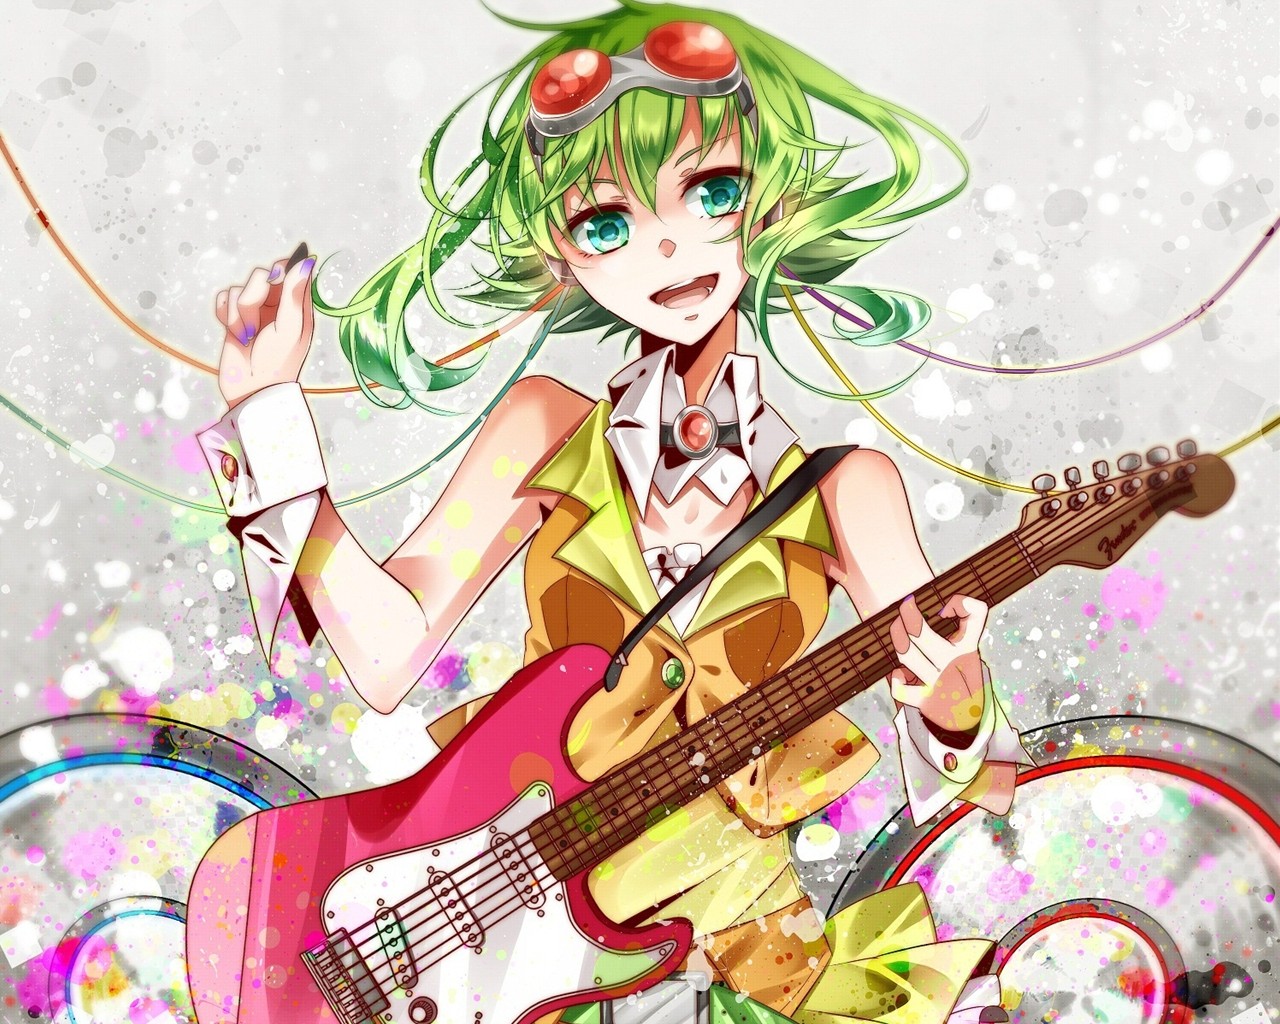 Gumi 壁紙no 43 45 Vocaloid ボーカロイド 壁紙家